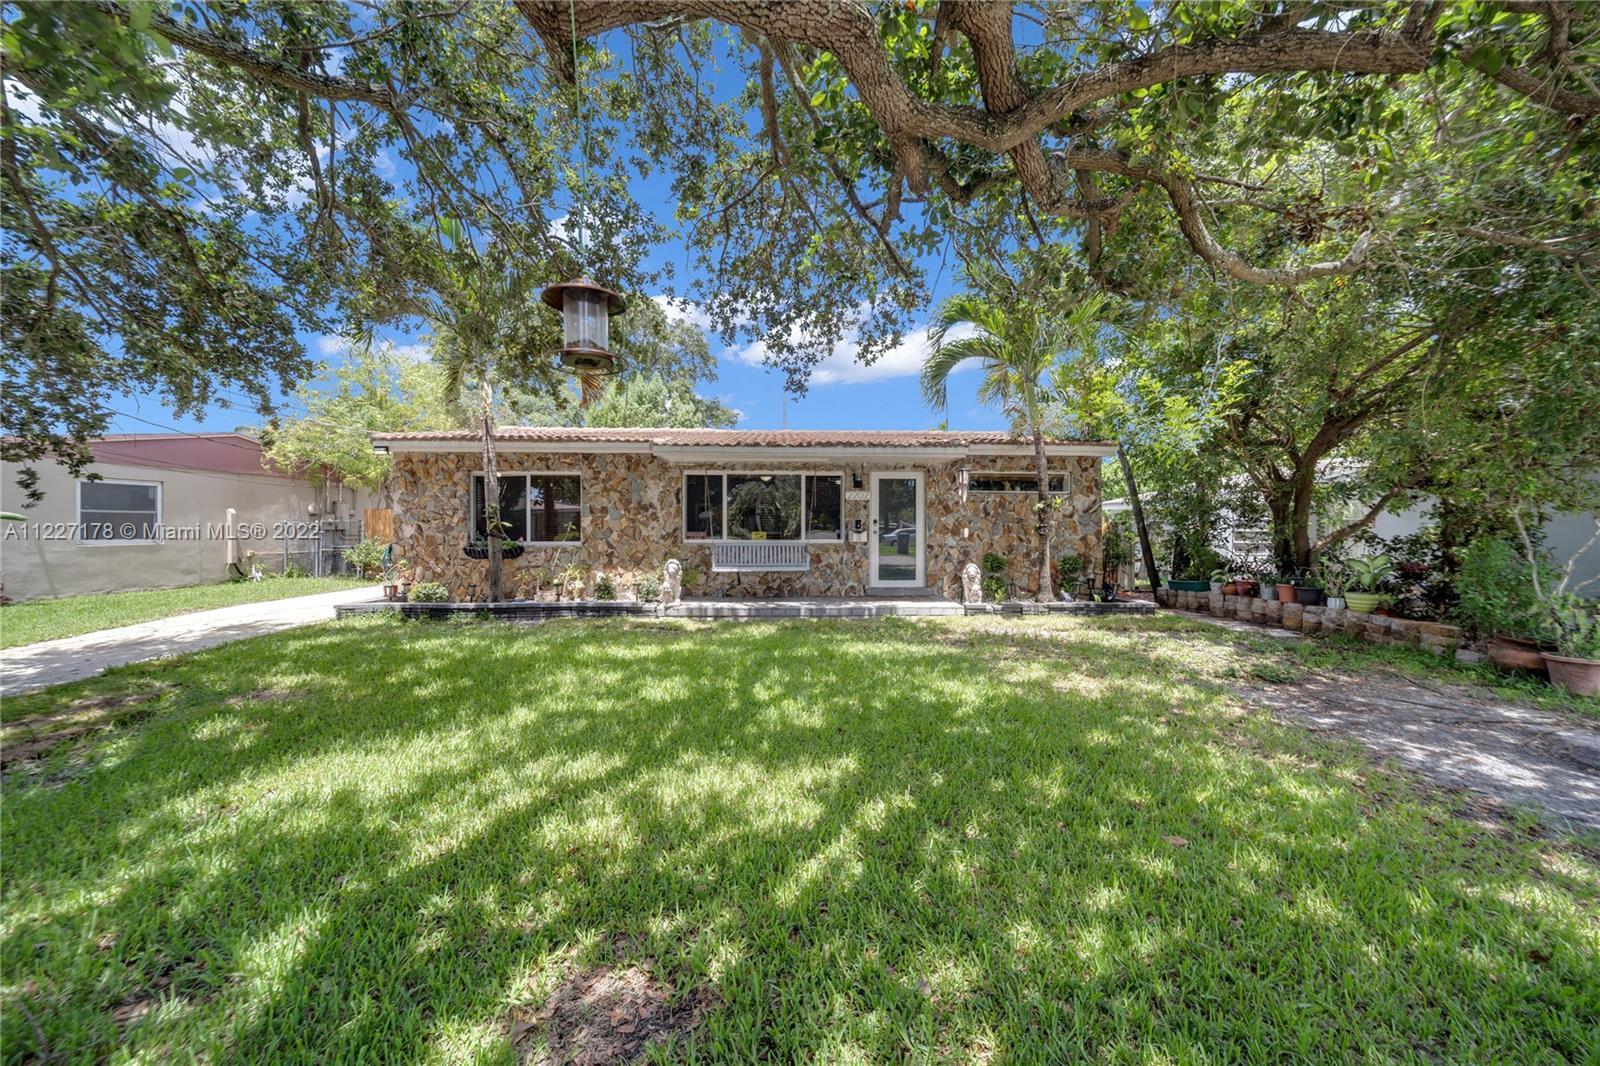 OpenHouse SUNDAY JUNE 26th 1-4PM. This adorable East Hollywood home is ready to move in and is just 